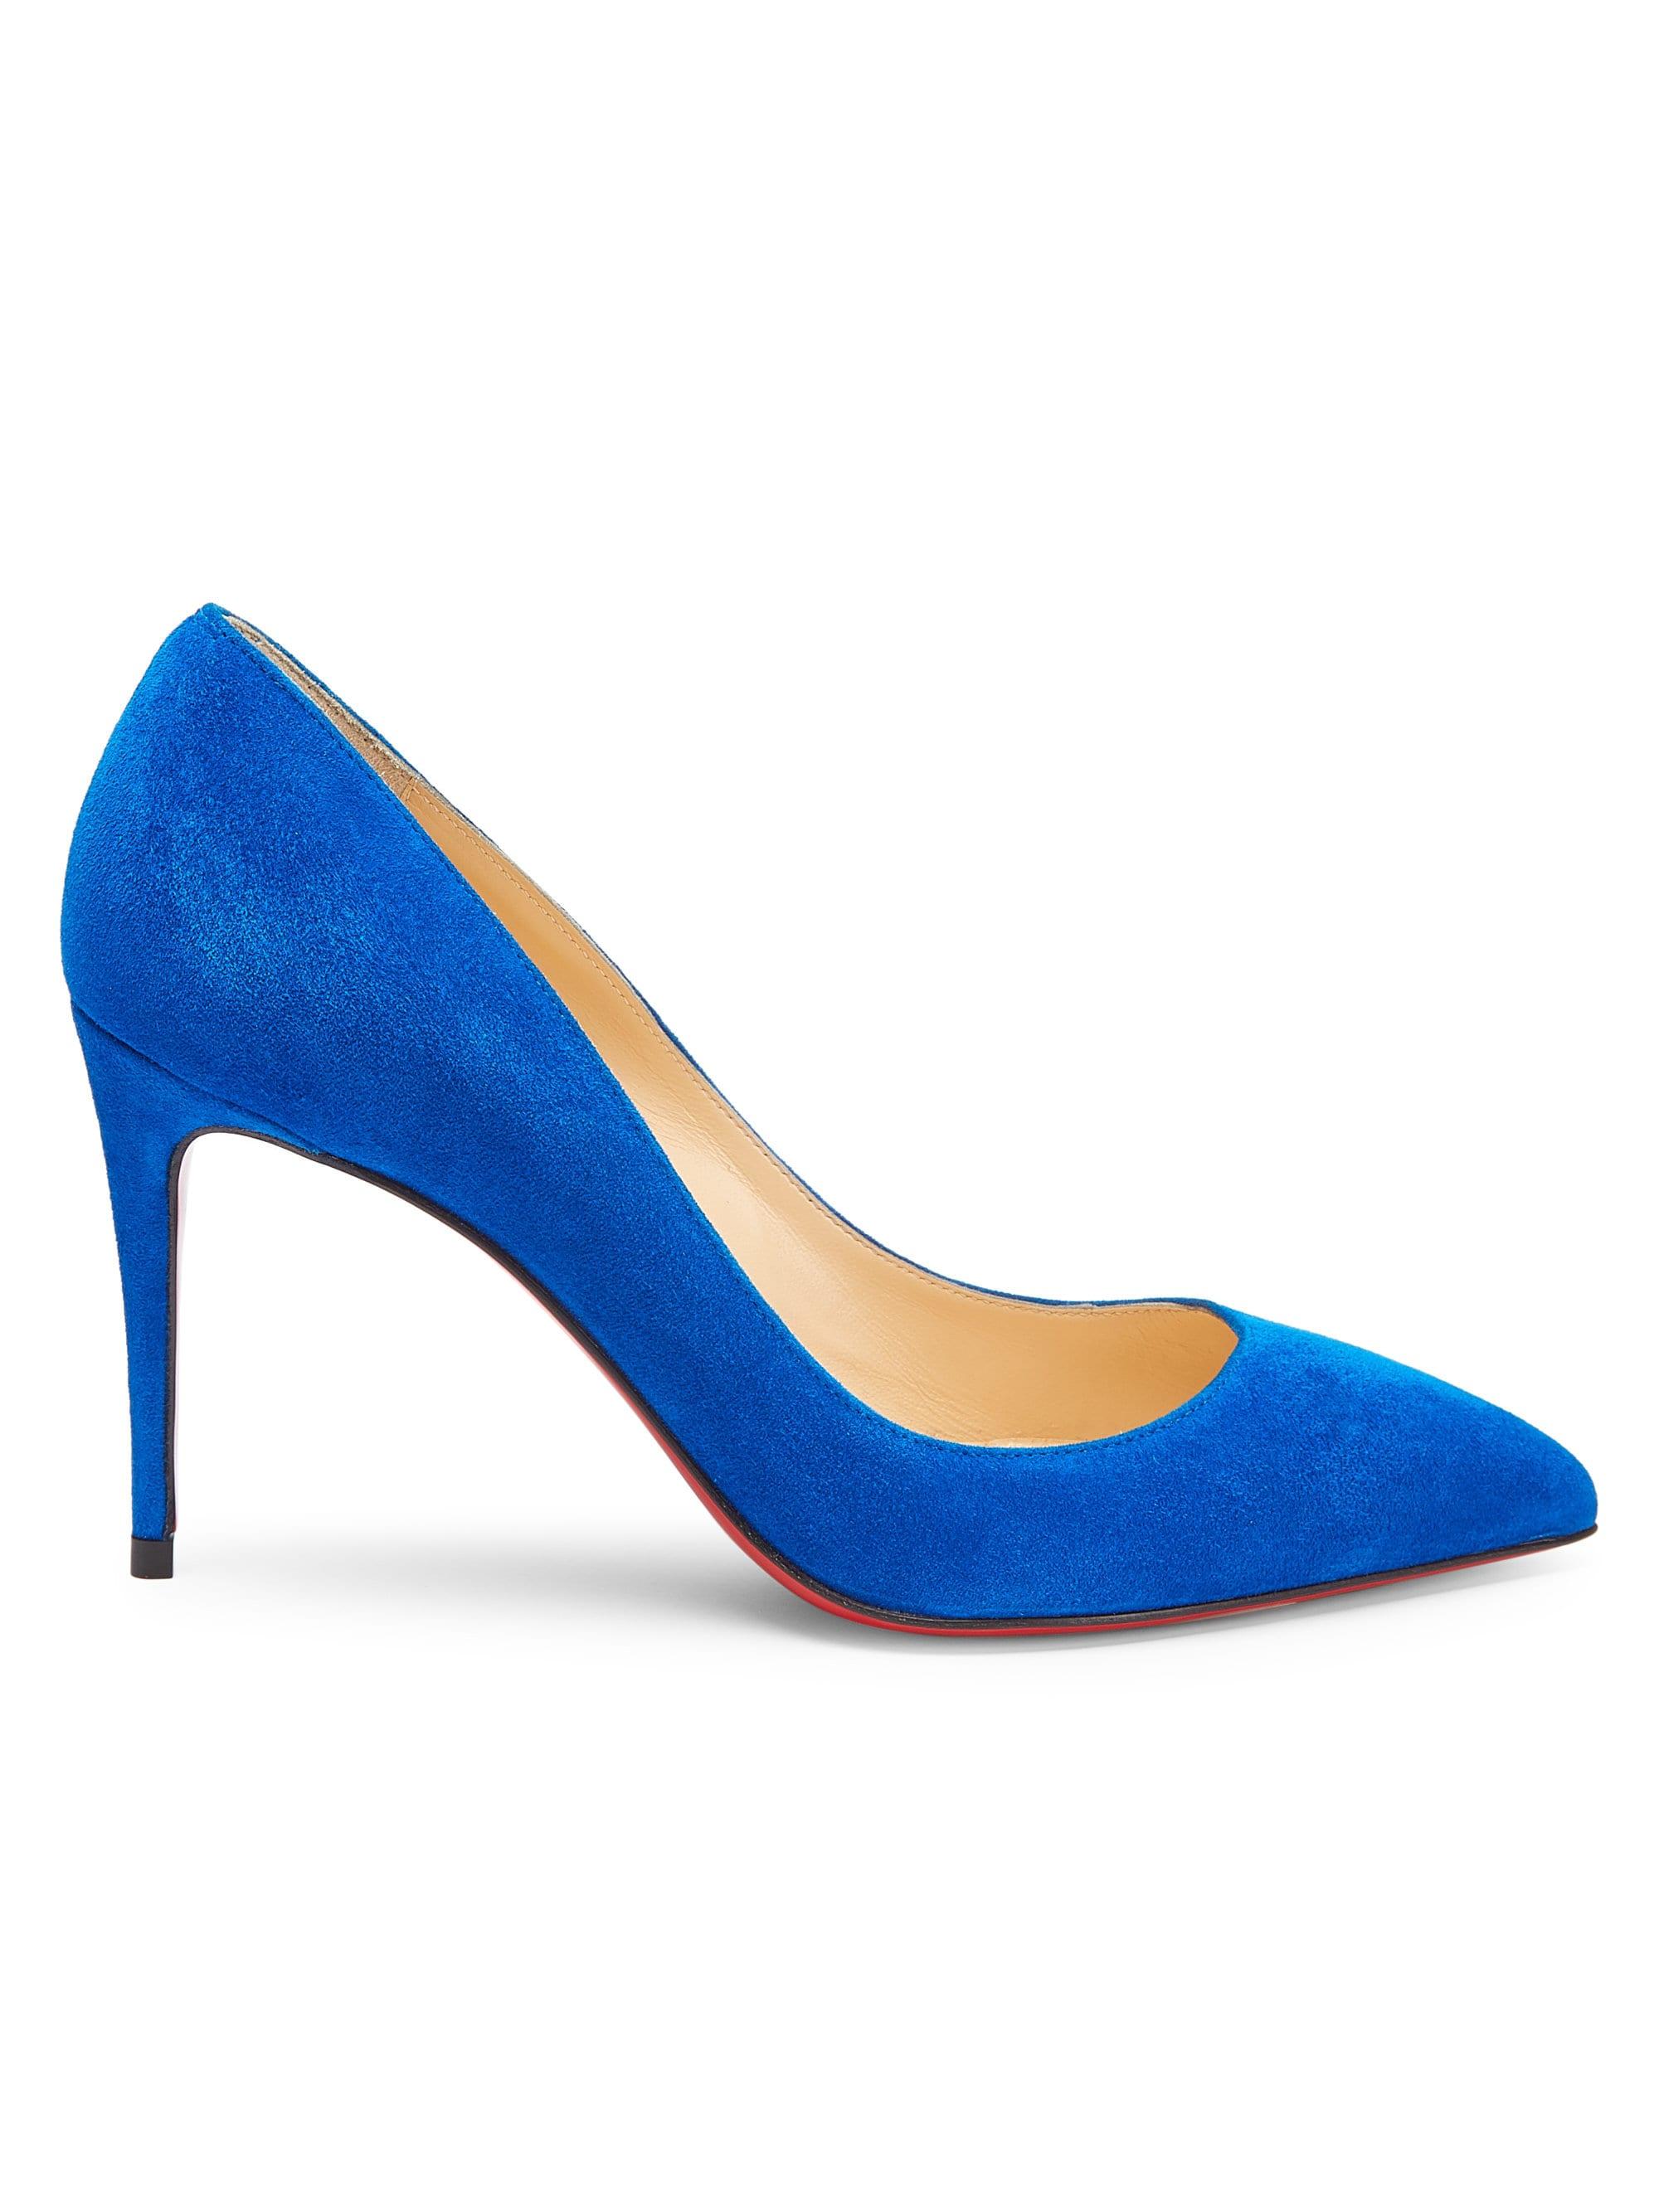 Christian Louboutin Pigalle Follies 85 Suede Pumps in Blue - Lyst